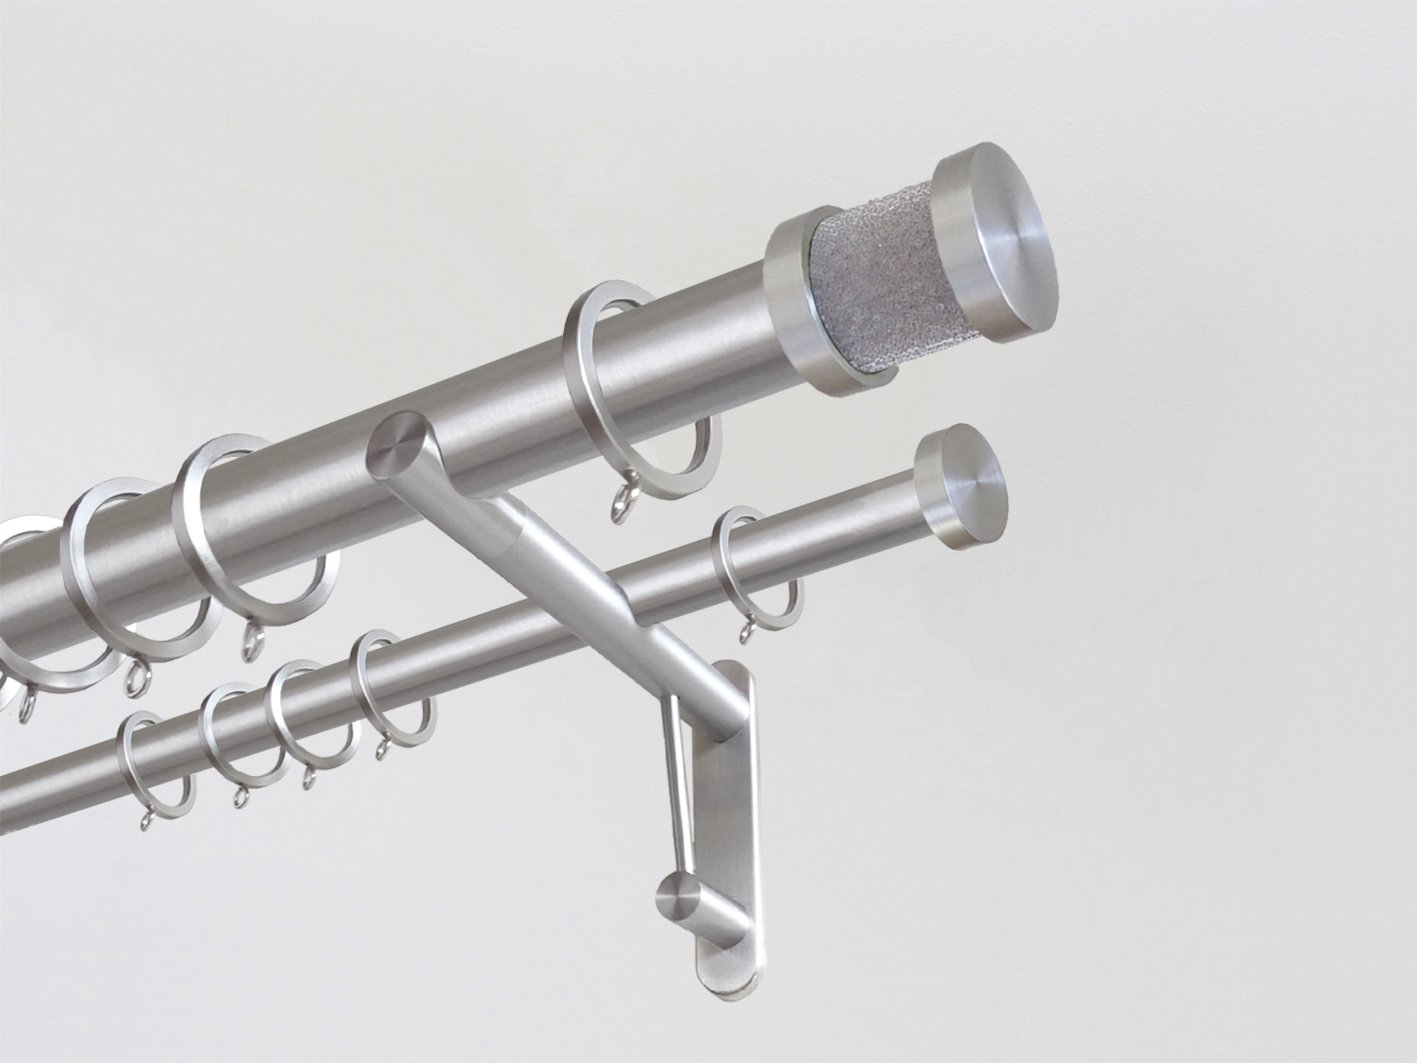 30mm diameter stainless steel double curtain pole system with Groove finials in "oyster"